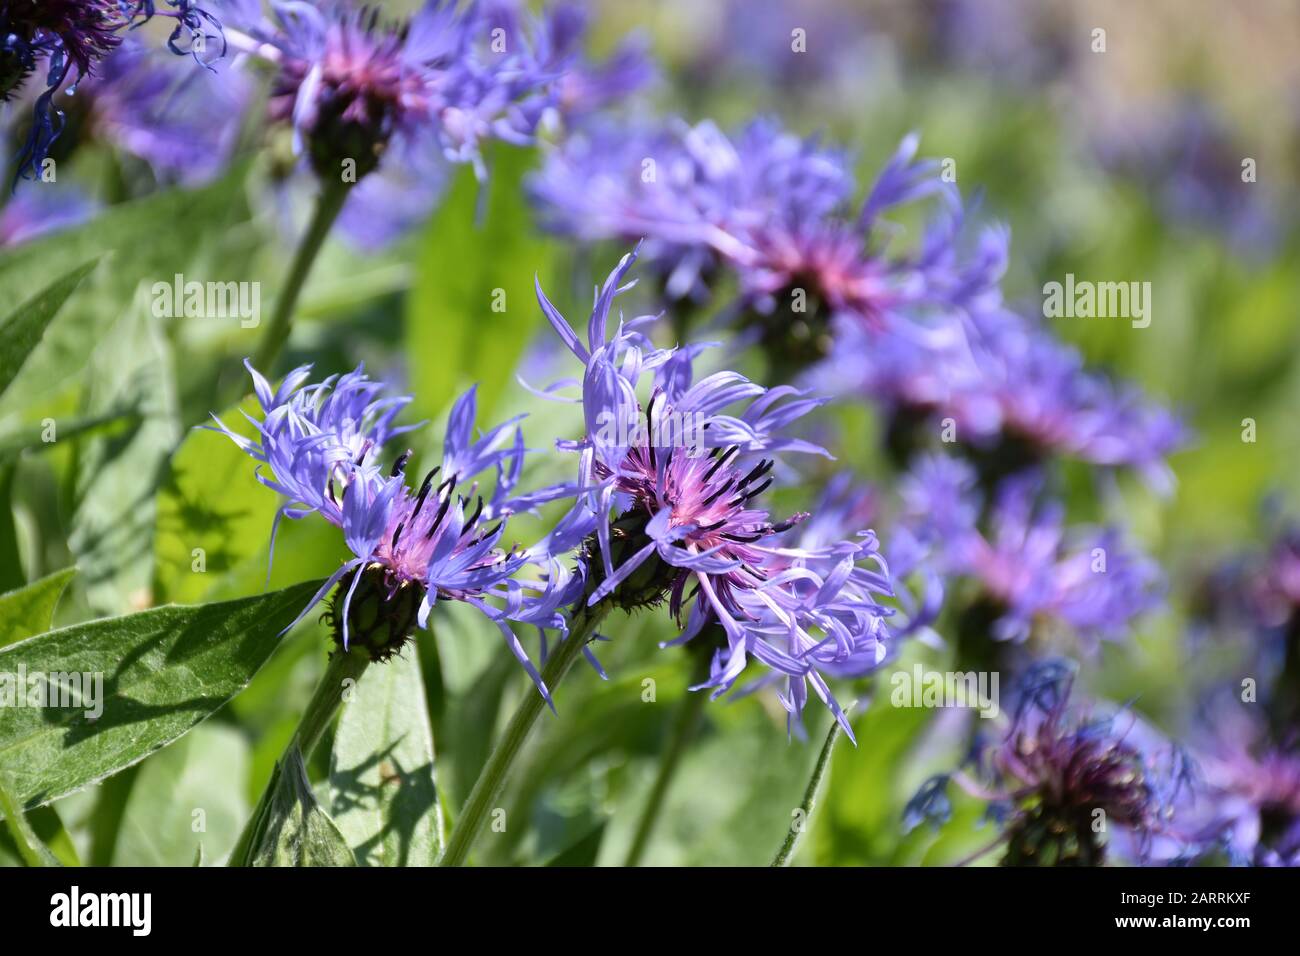 Blooming blue bachelor button flowers in a garden. Stock Photo